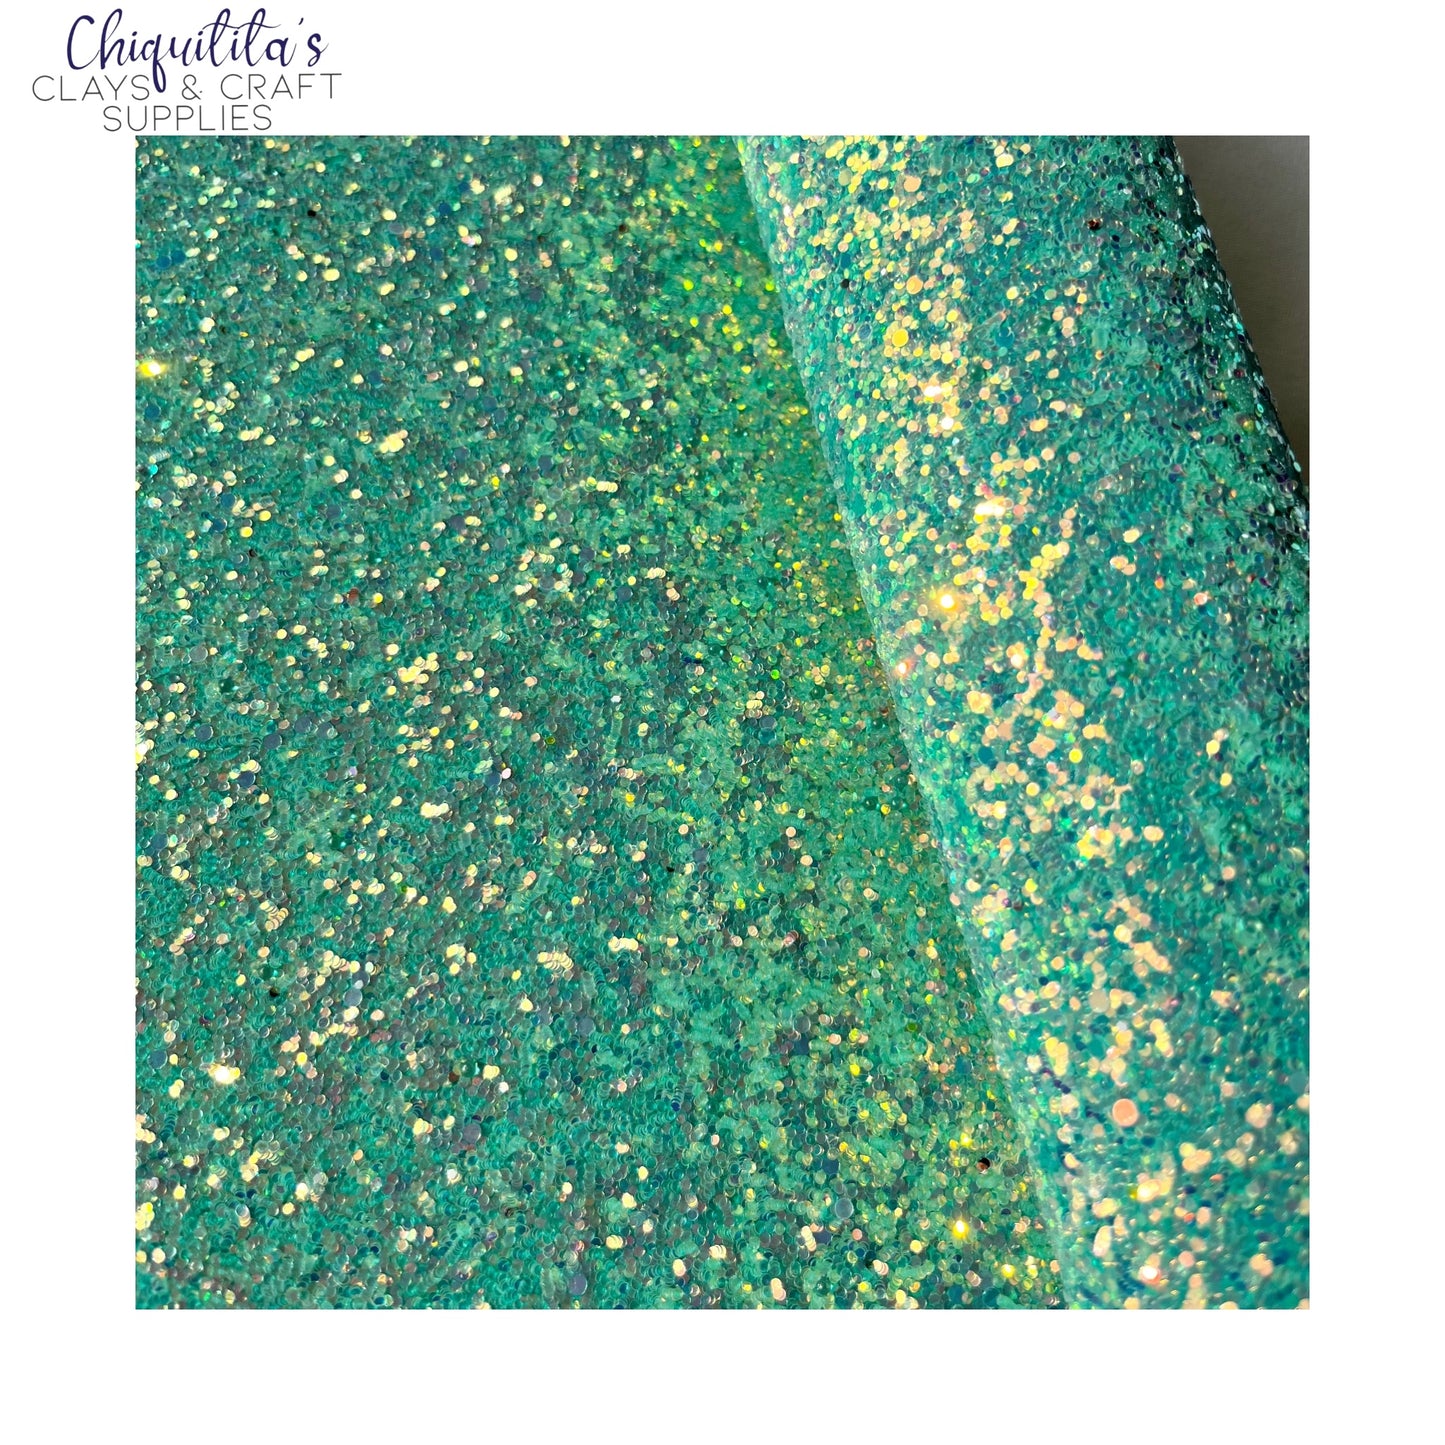 Bow Craft Supplies: Emerald Droplets Edition- Chunky Glitter Sheet